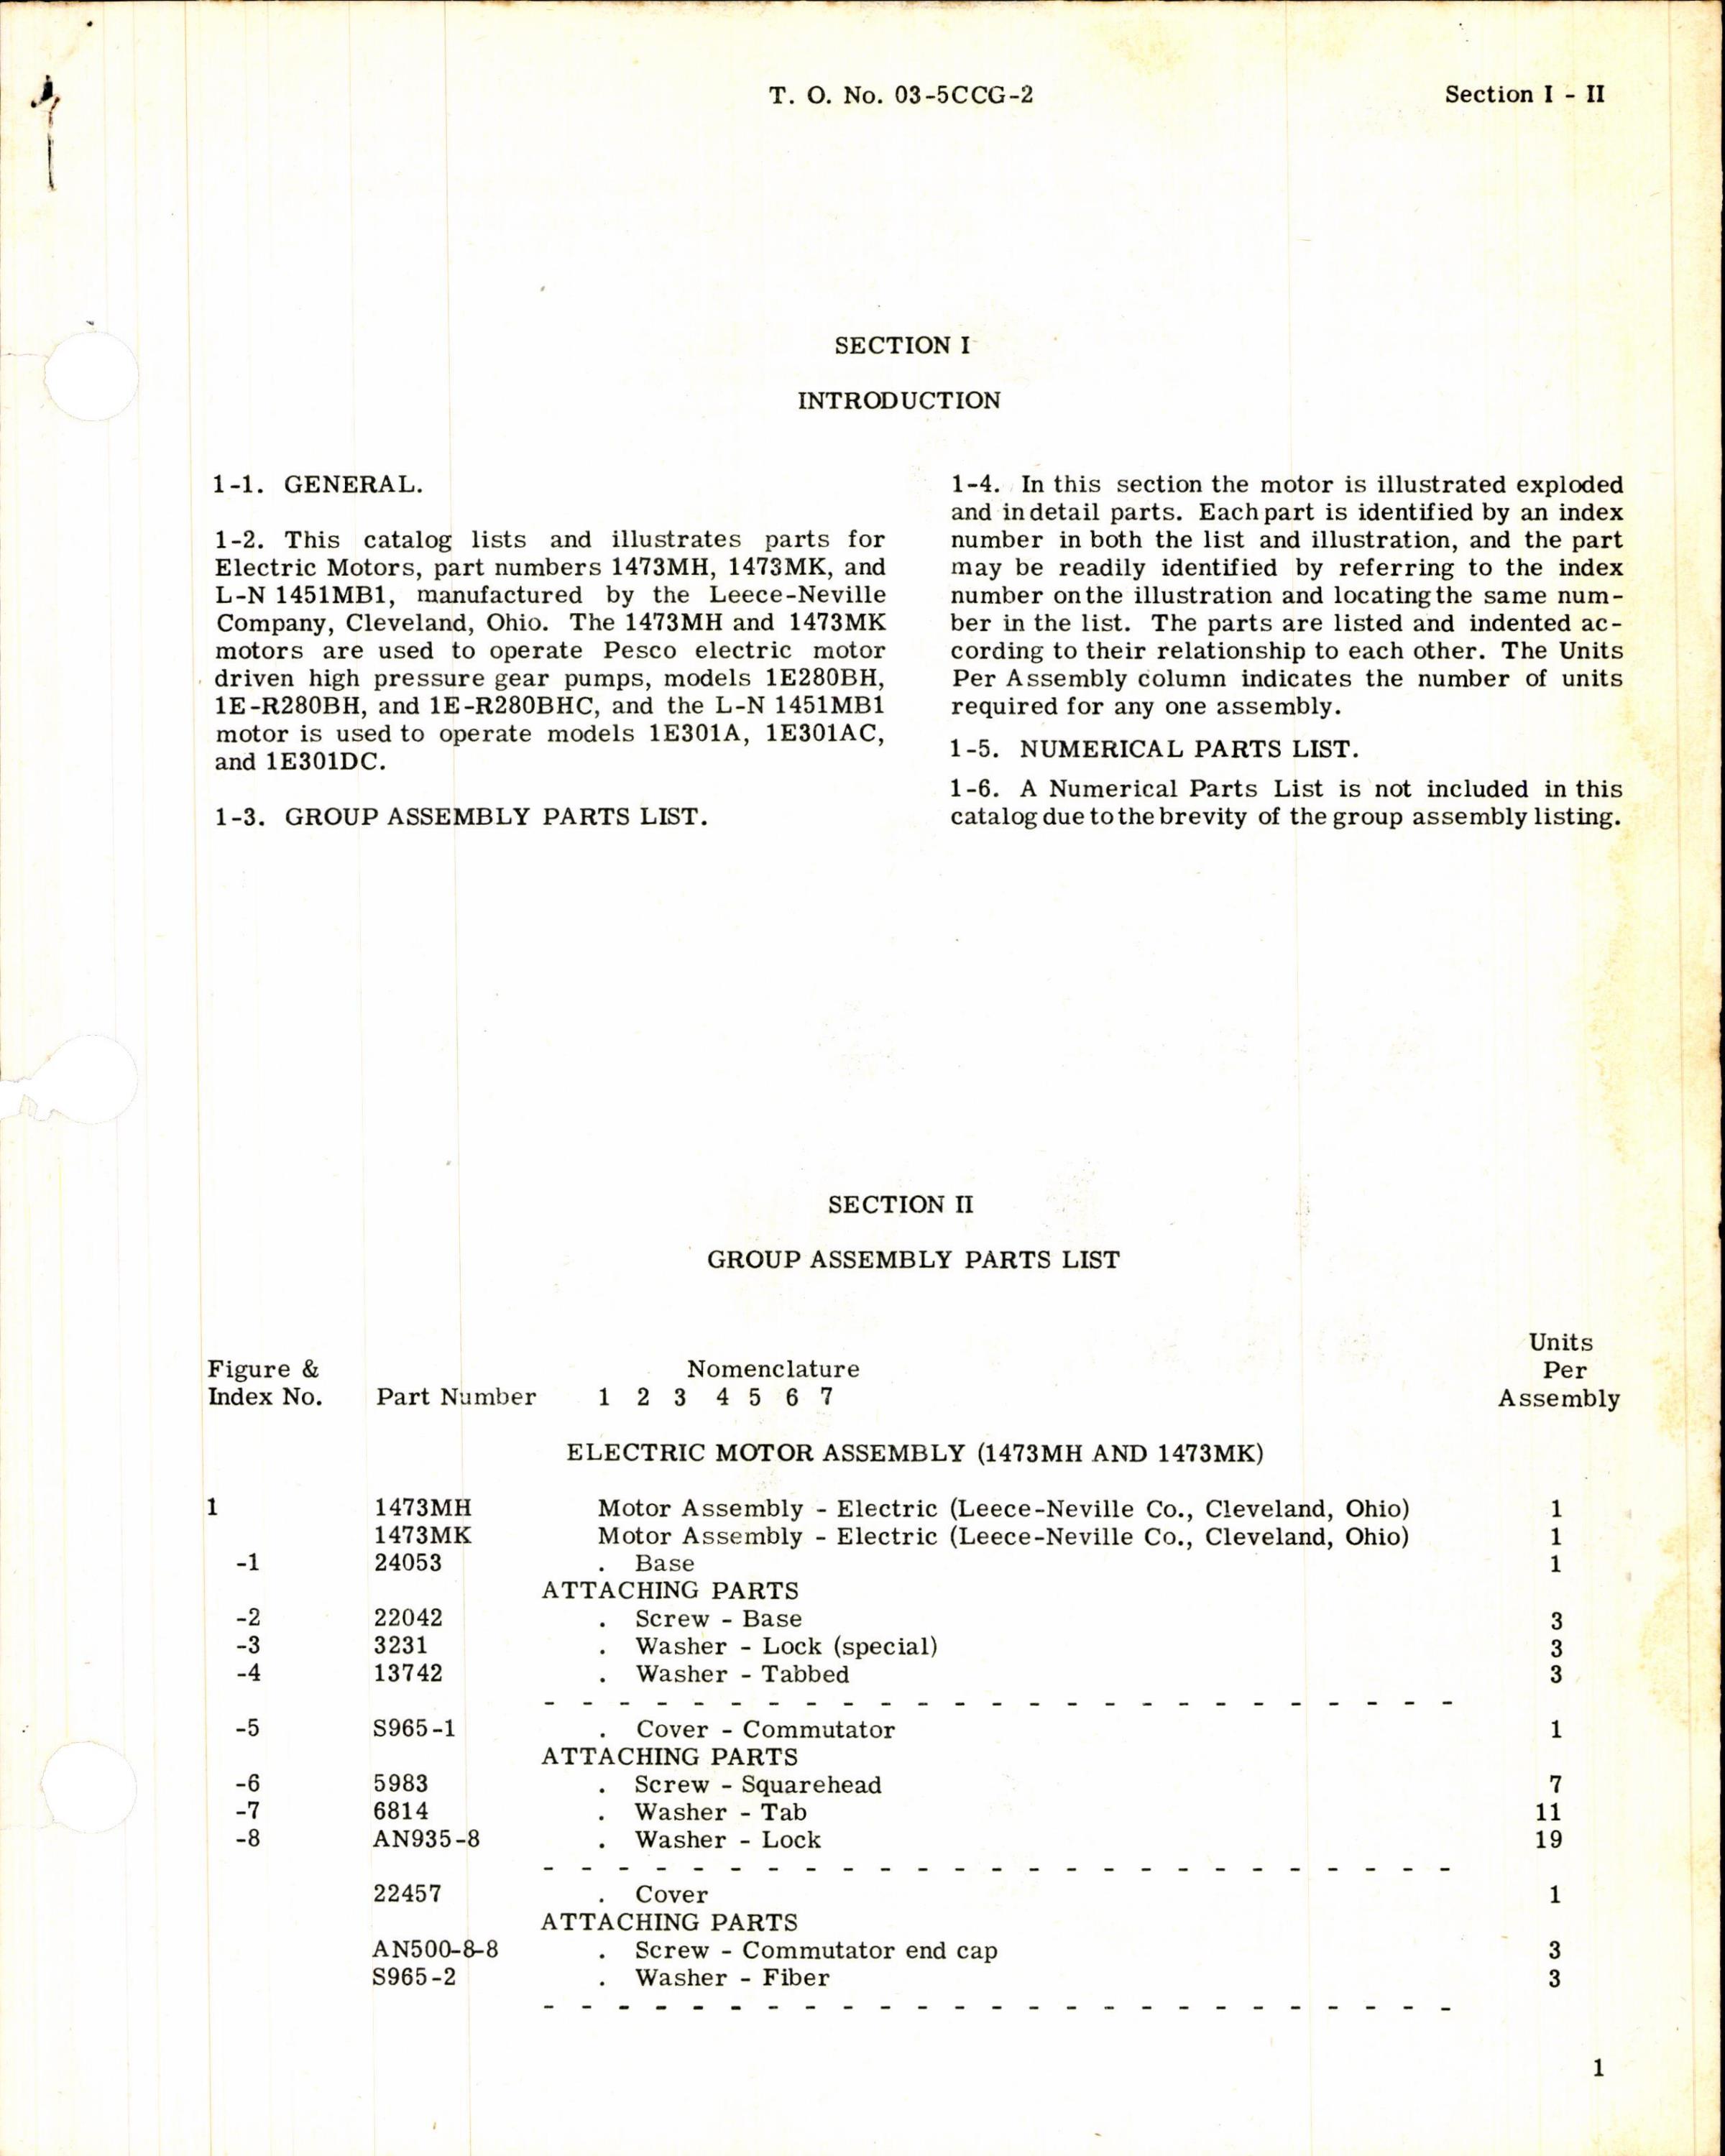 Sample page 3 from AirCorps Library document: Parts Catalog for Leece-Neville Electric Motor